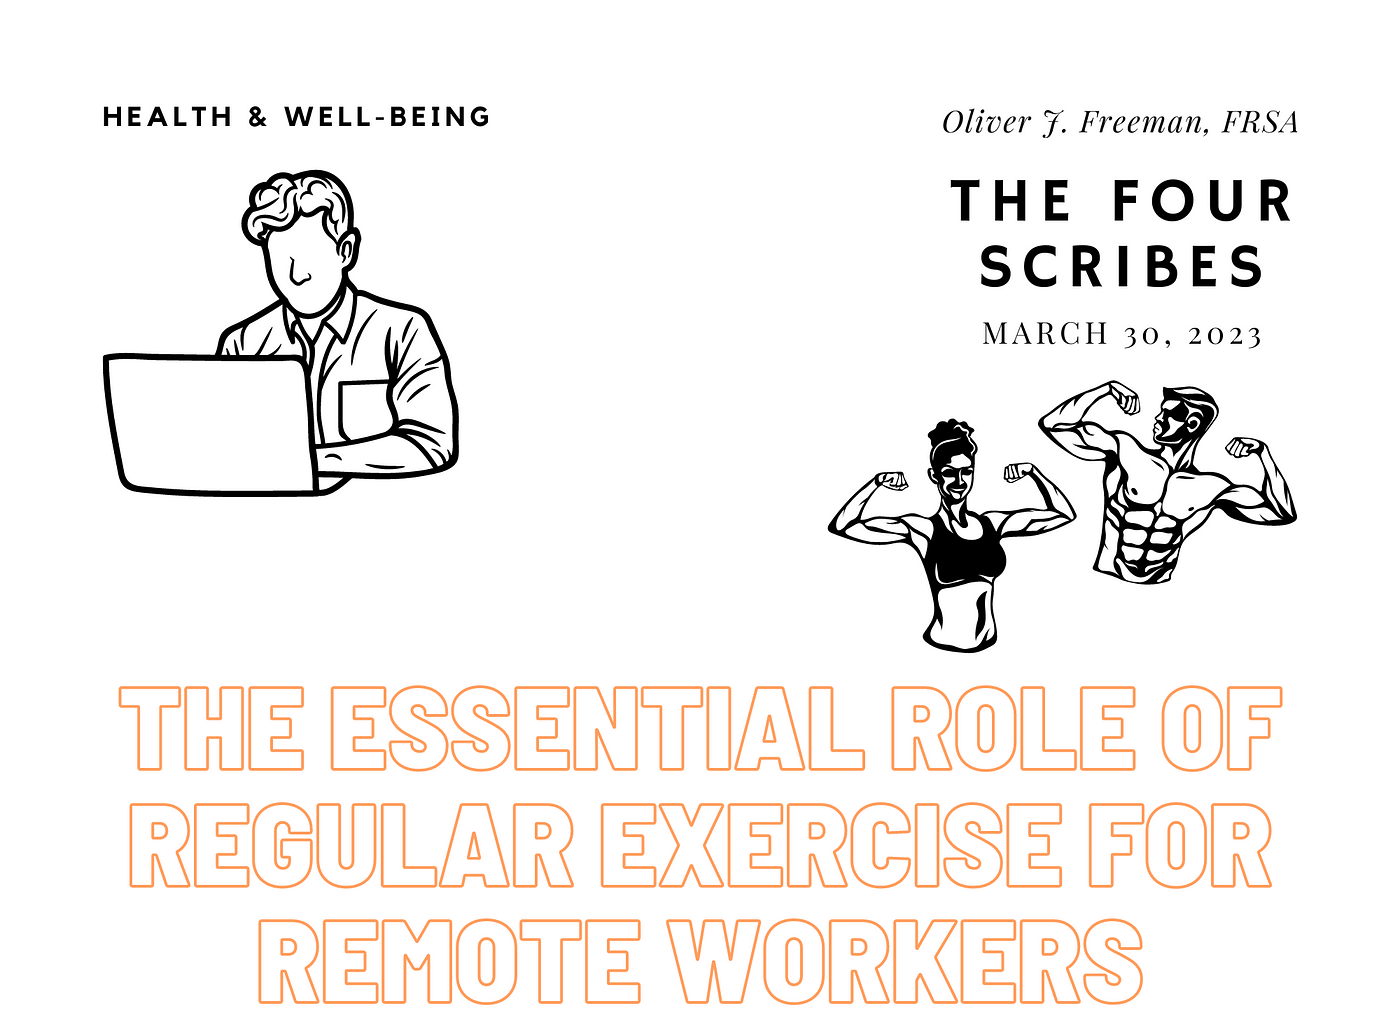 Work Well From Home: Staying effective in the age of remote and